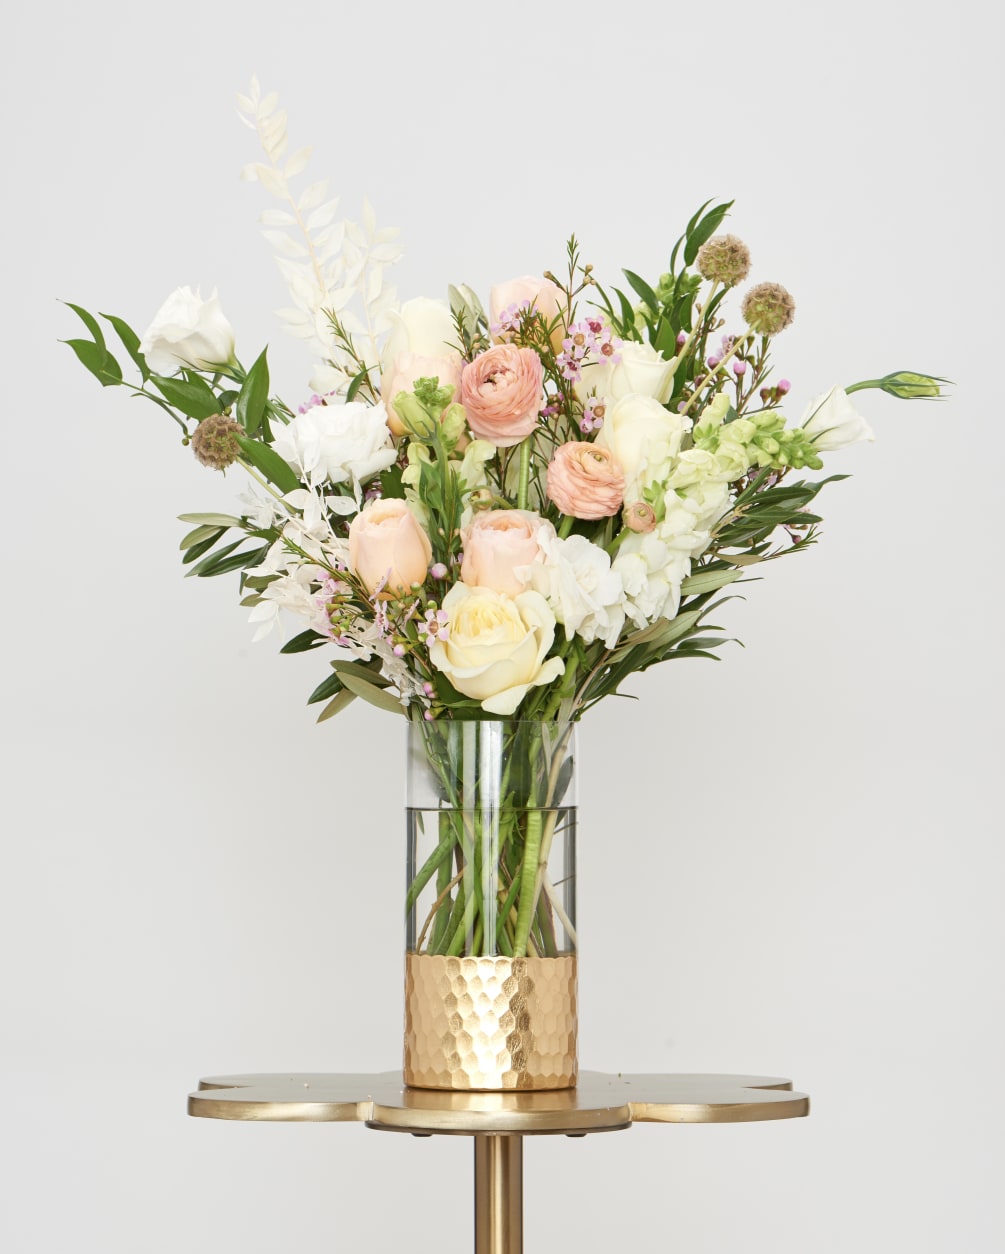 Seasonal spring flowers. Beautiful mixed vase arrangement.
Perfect size for: A dining table